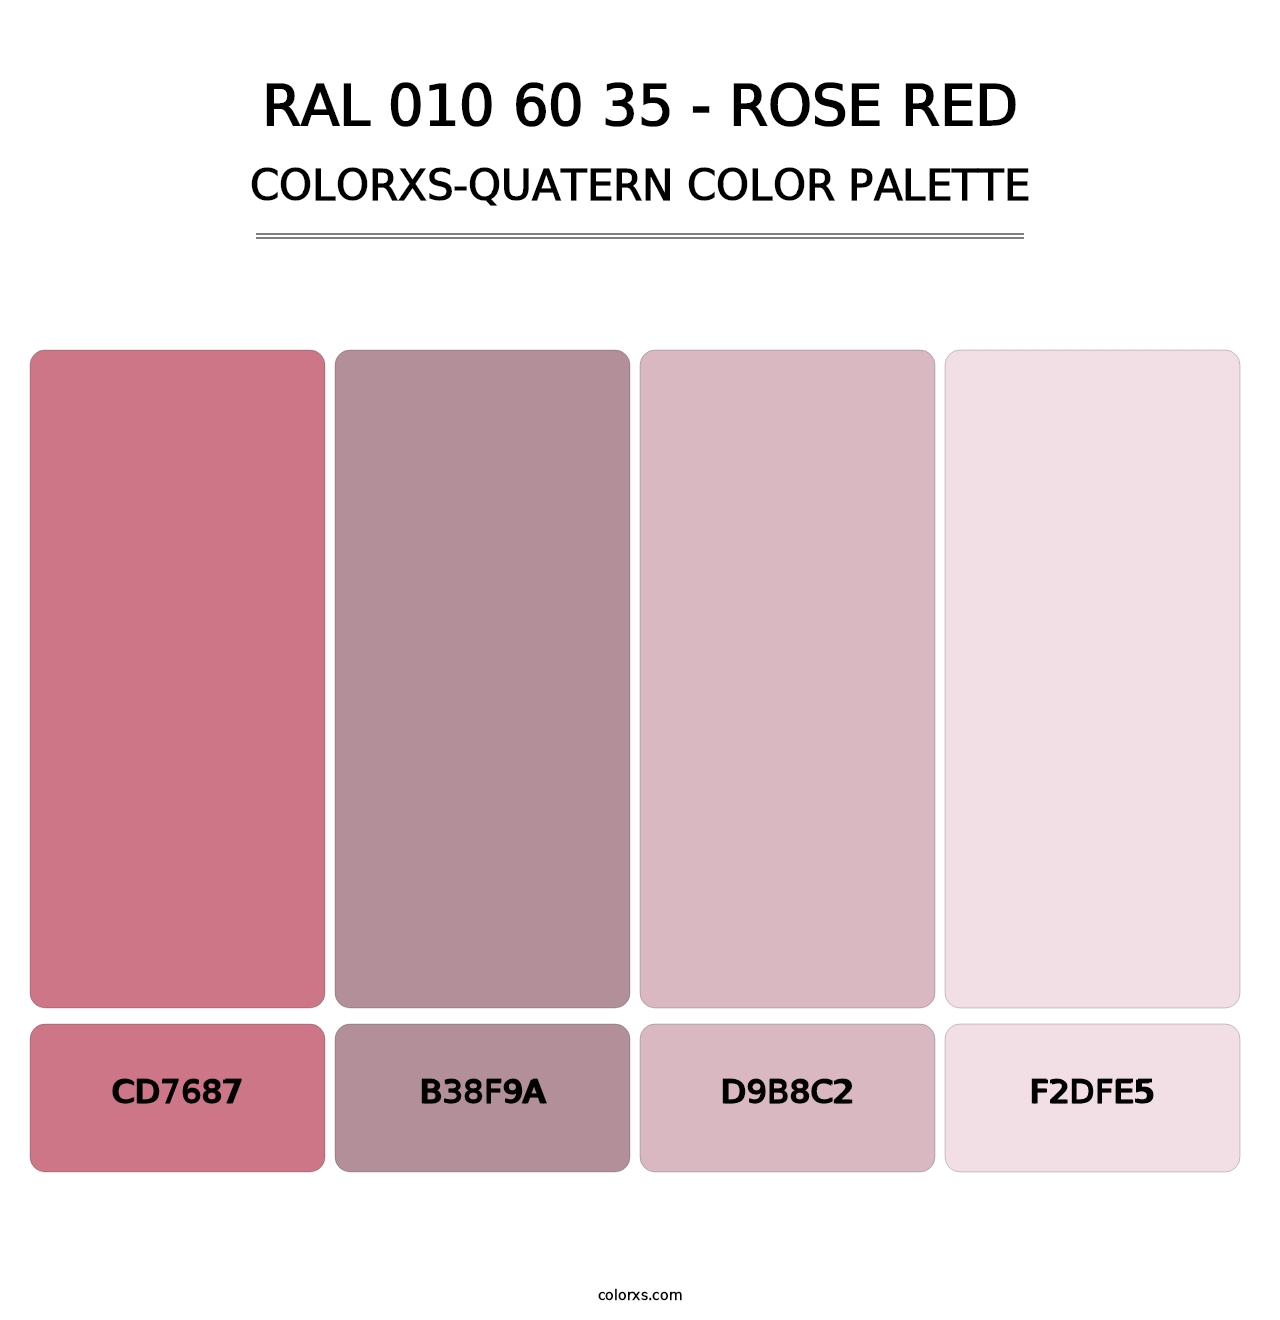 RAL 010 60 35 - Rose Red - Colorxs Quatern Palette